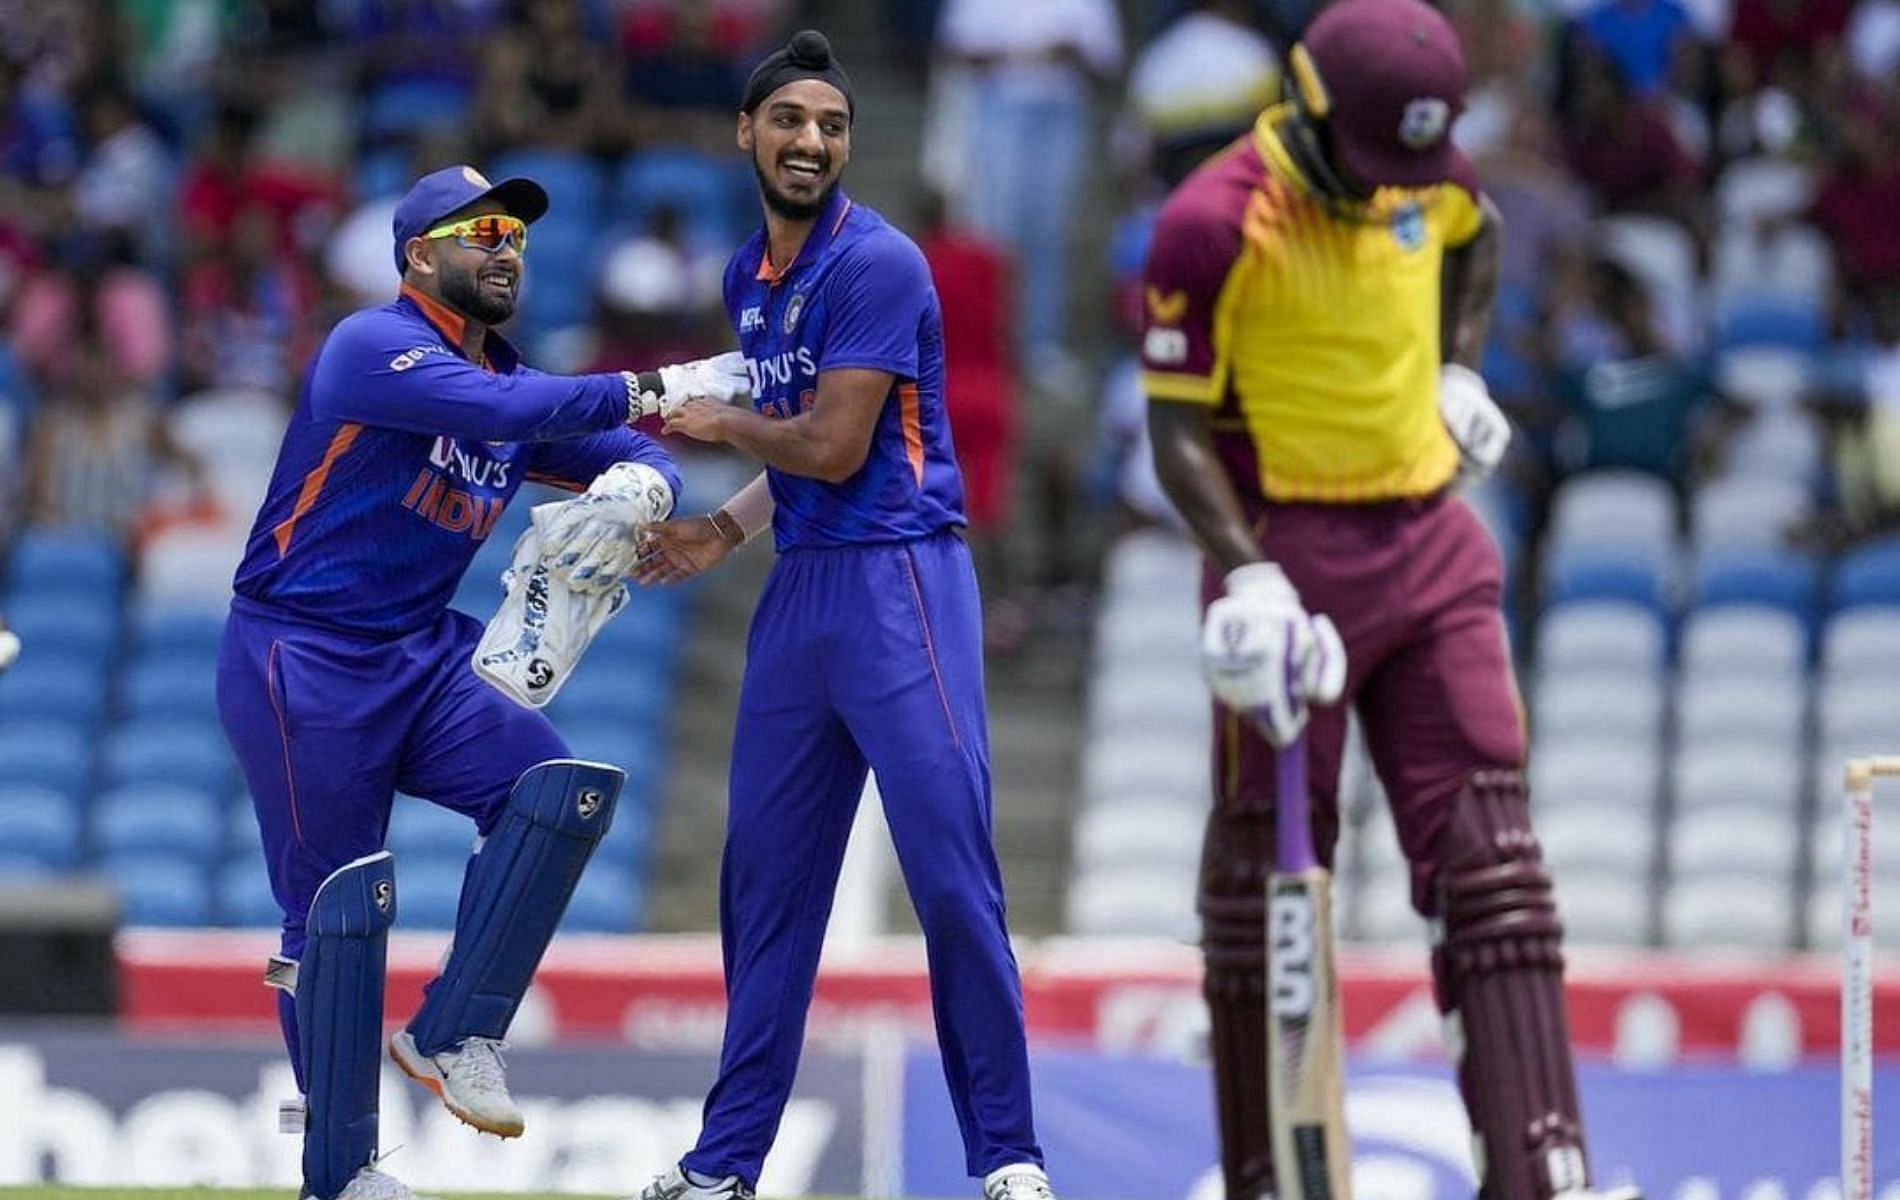 Arshdeep Singh celebrates a wicket in the 1st T20I against West Indies.